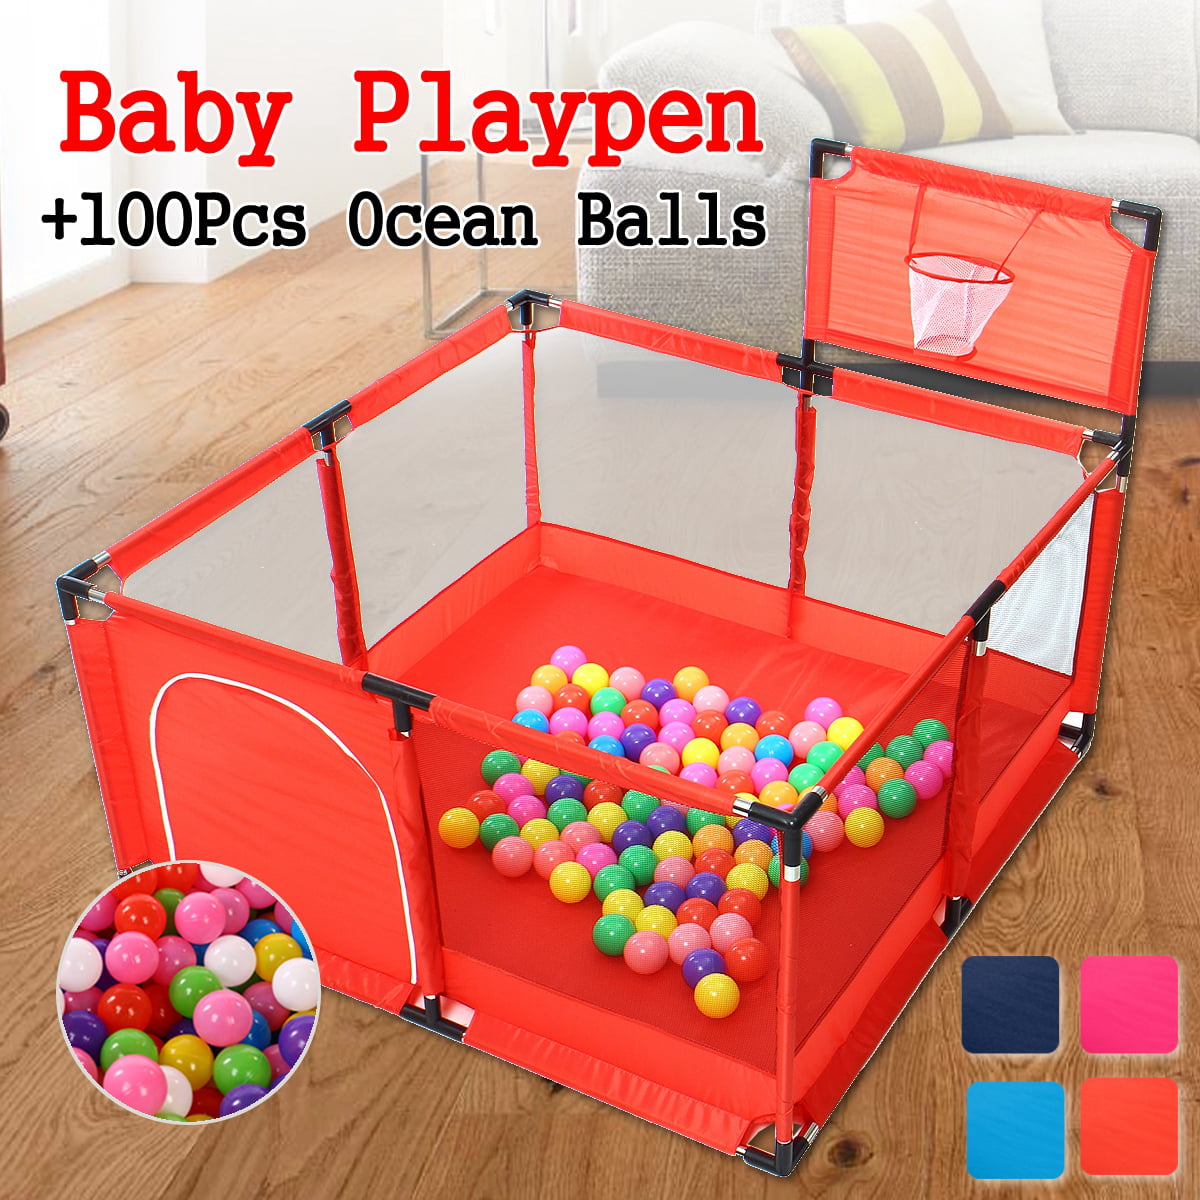 balls for babies to play with